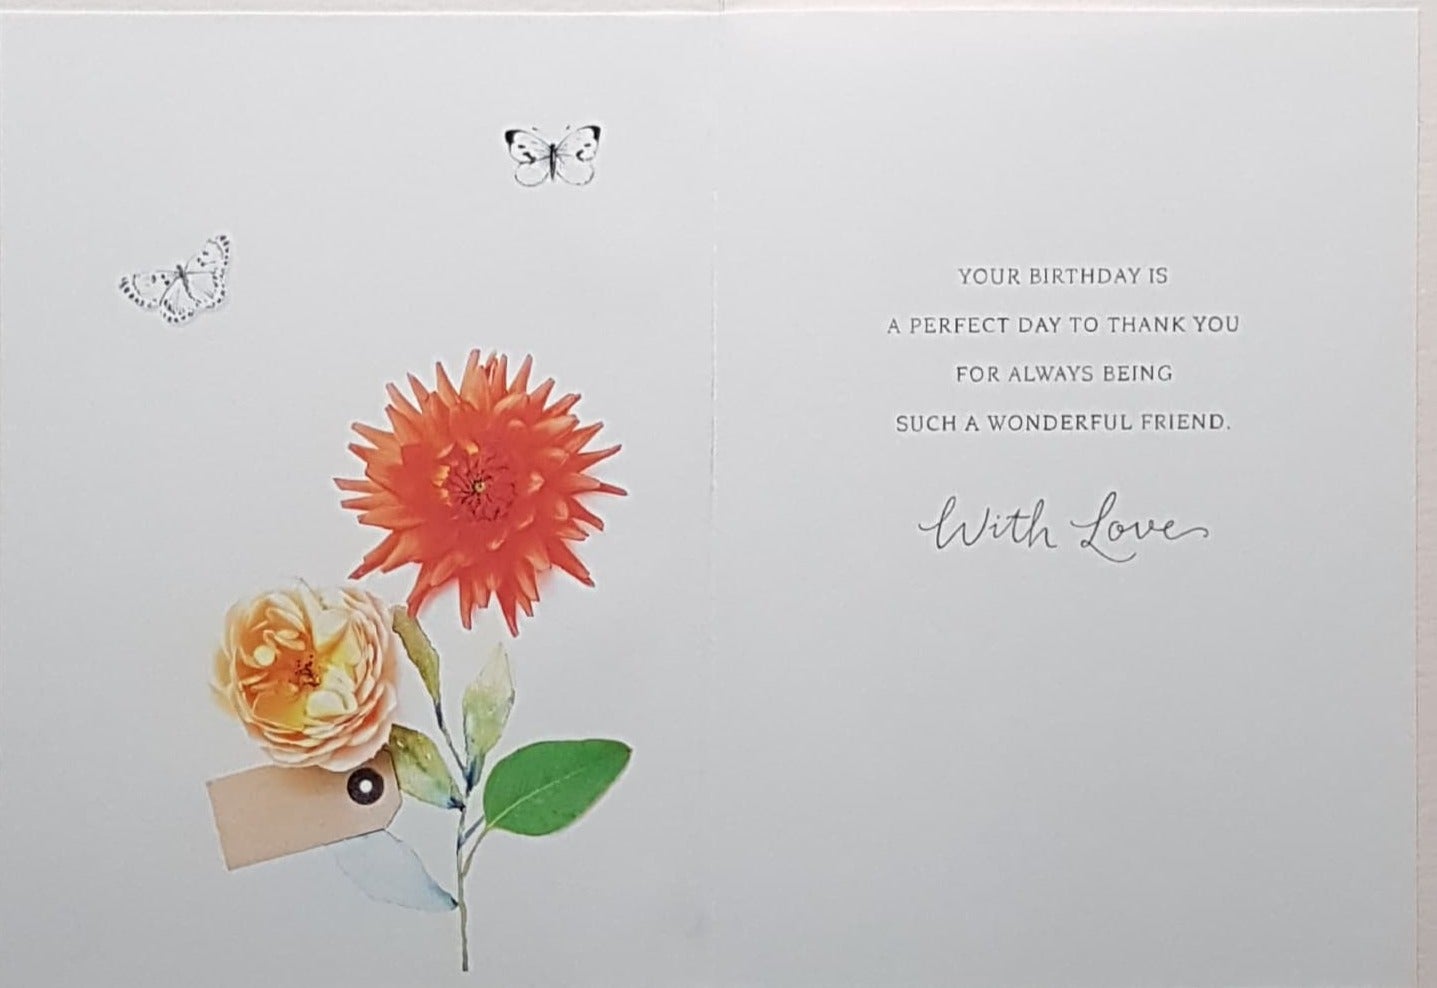 Birthday Card - Special Friend / Flowers Tied To A Gift Box